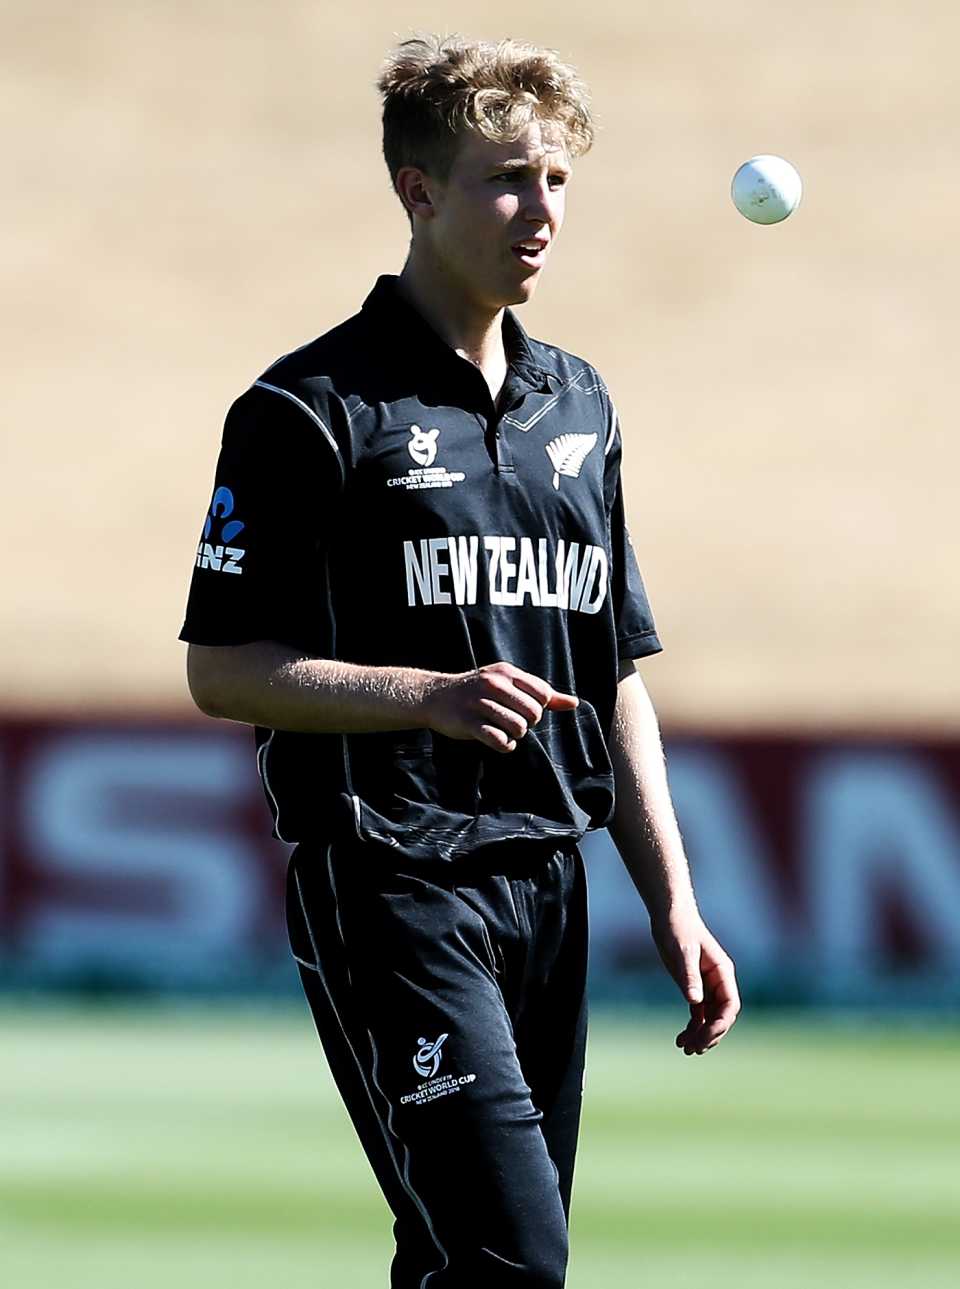 Luke Georgeson gets ready to bowl, New Zealand vs England, U-19 World Cup, 7th place play-off, Queenstown, January 30, 2018